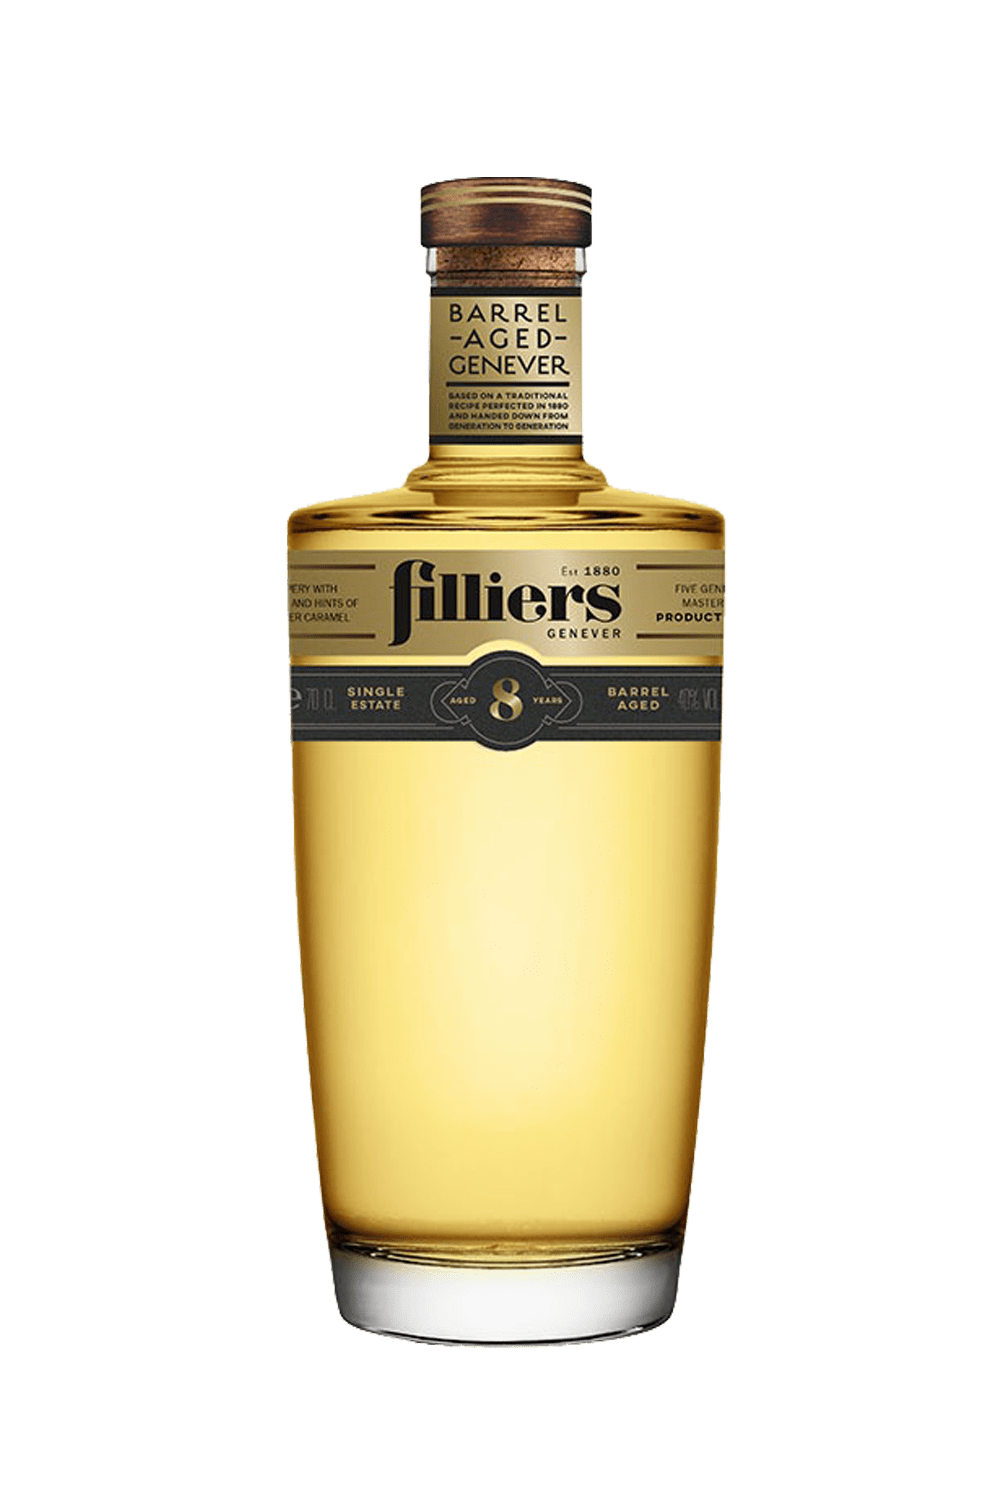 Filliers Barrel Aged Genever 8 Years Old